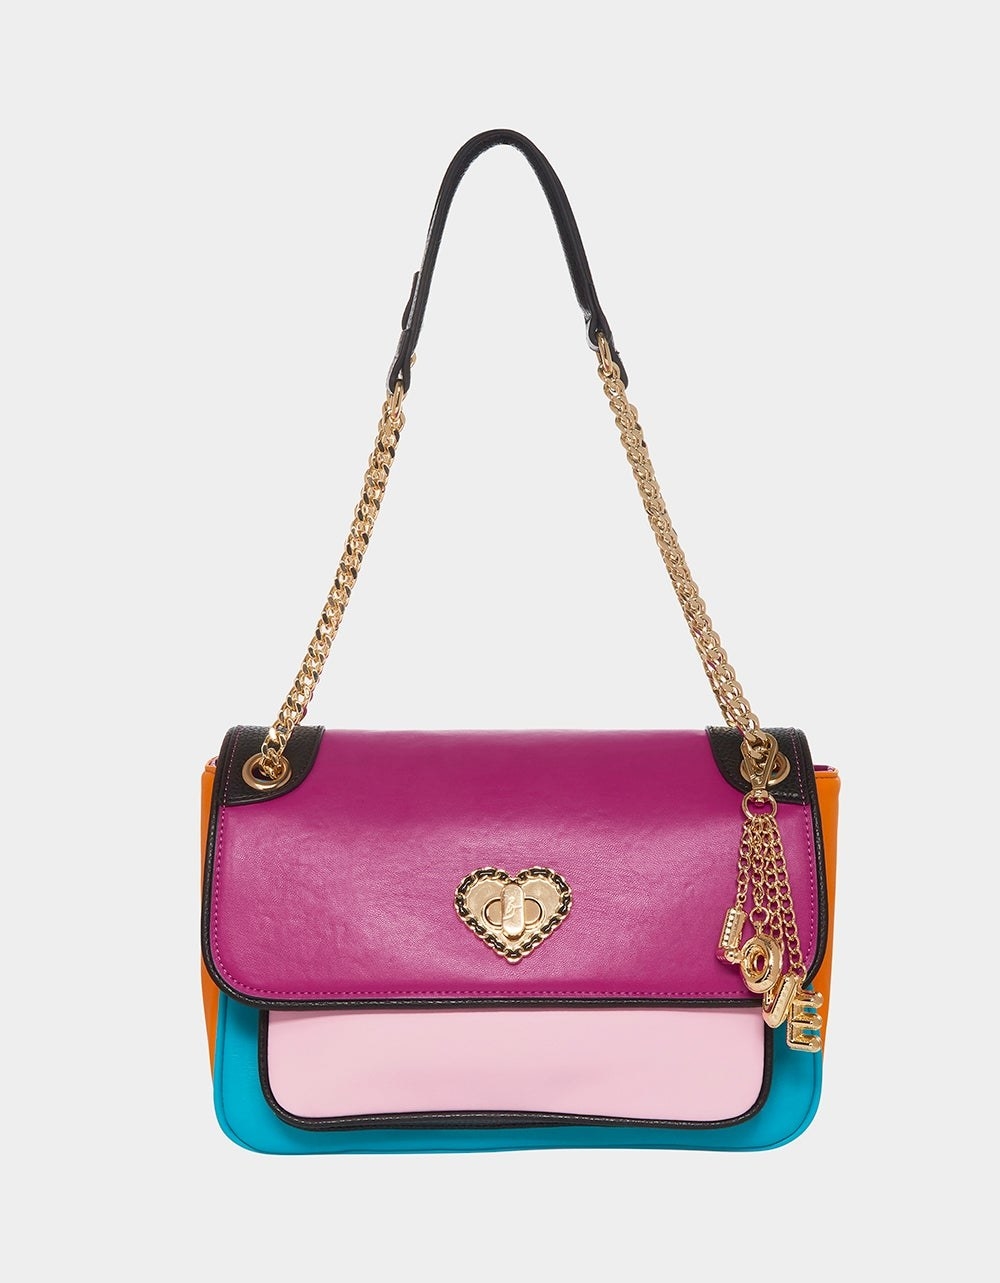 magenta, pink, teal, orange, and black bag with gold charm and hardware and heart-shaped turnlock clasp